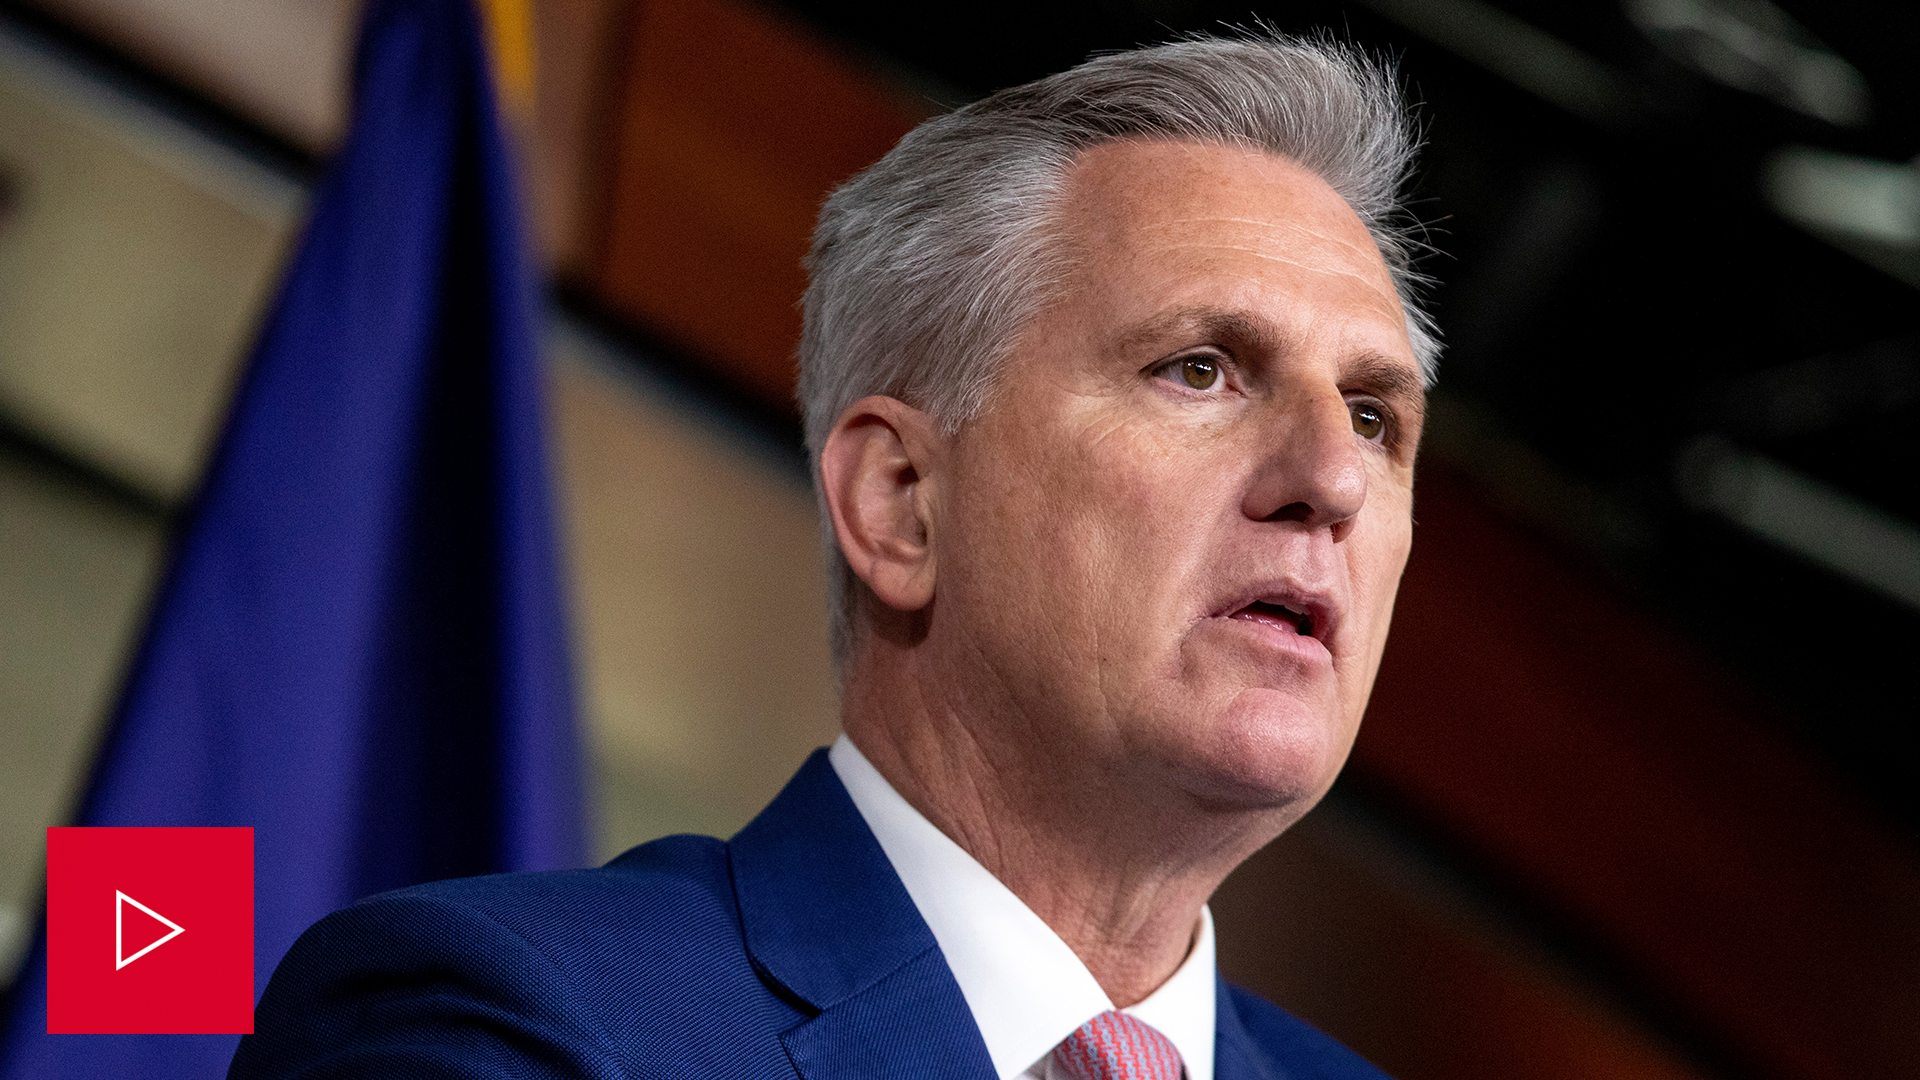 A video of House Minority Leader Kevin McCarthy speaking during a press conference.